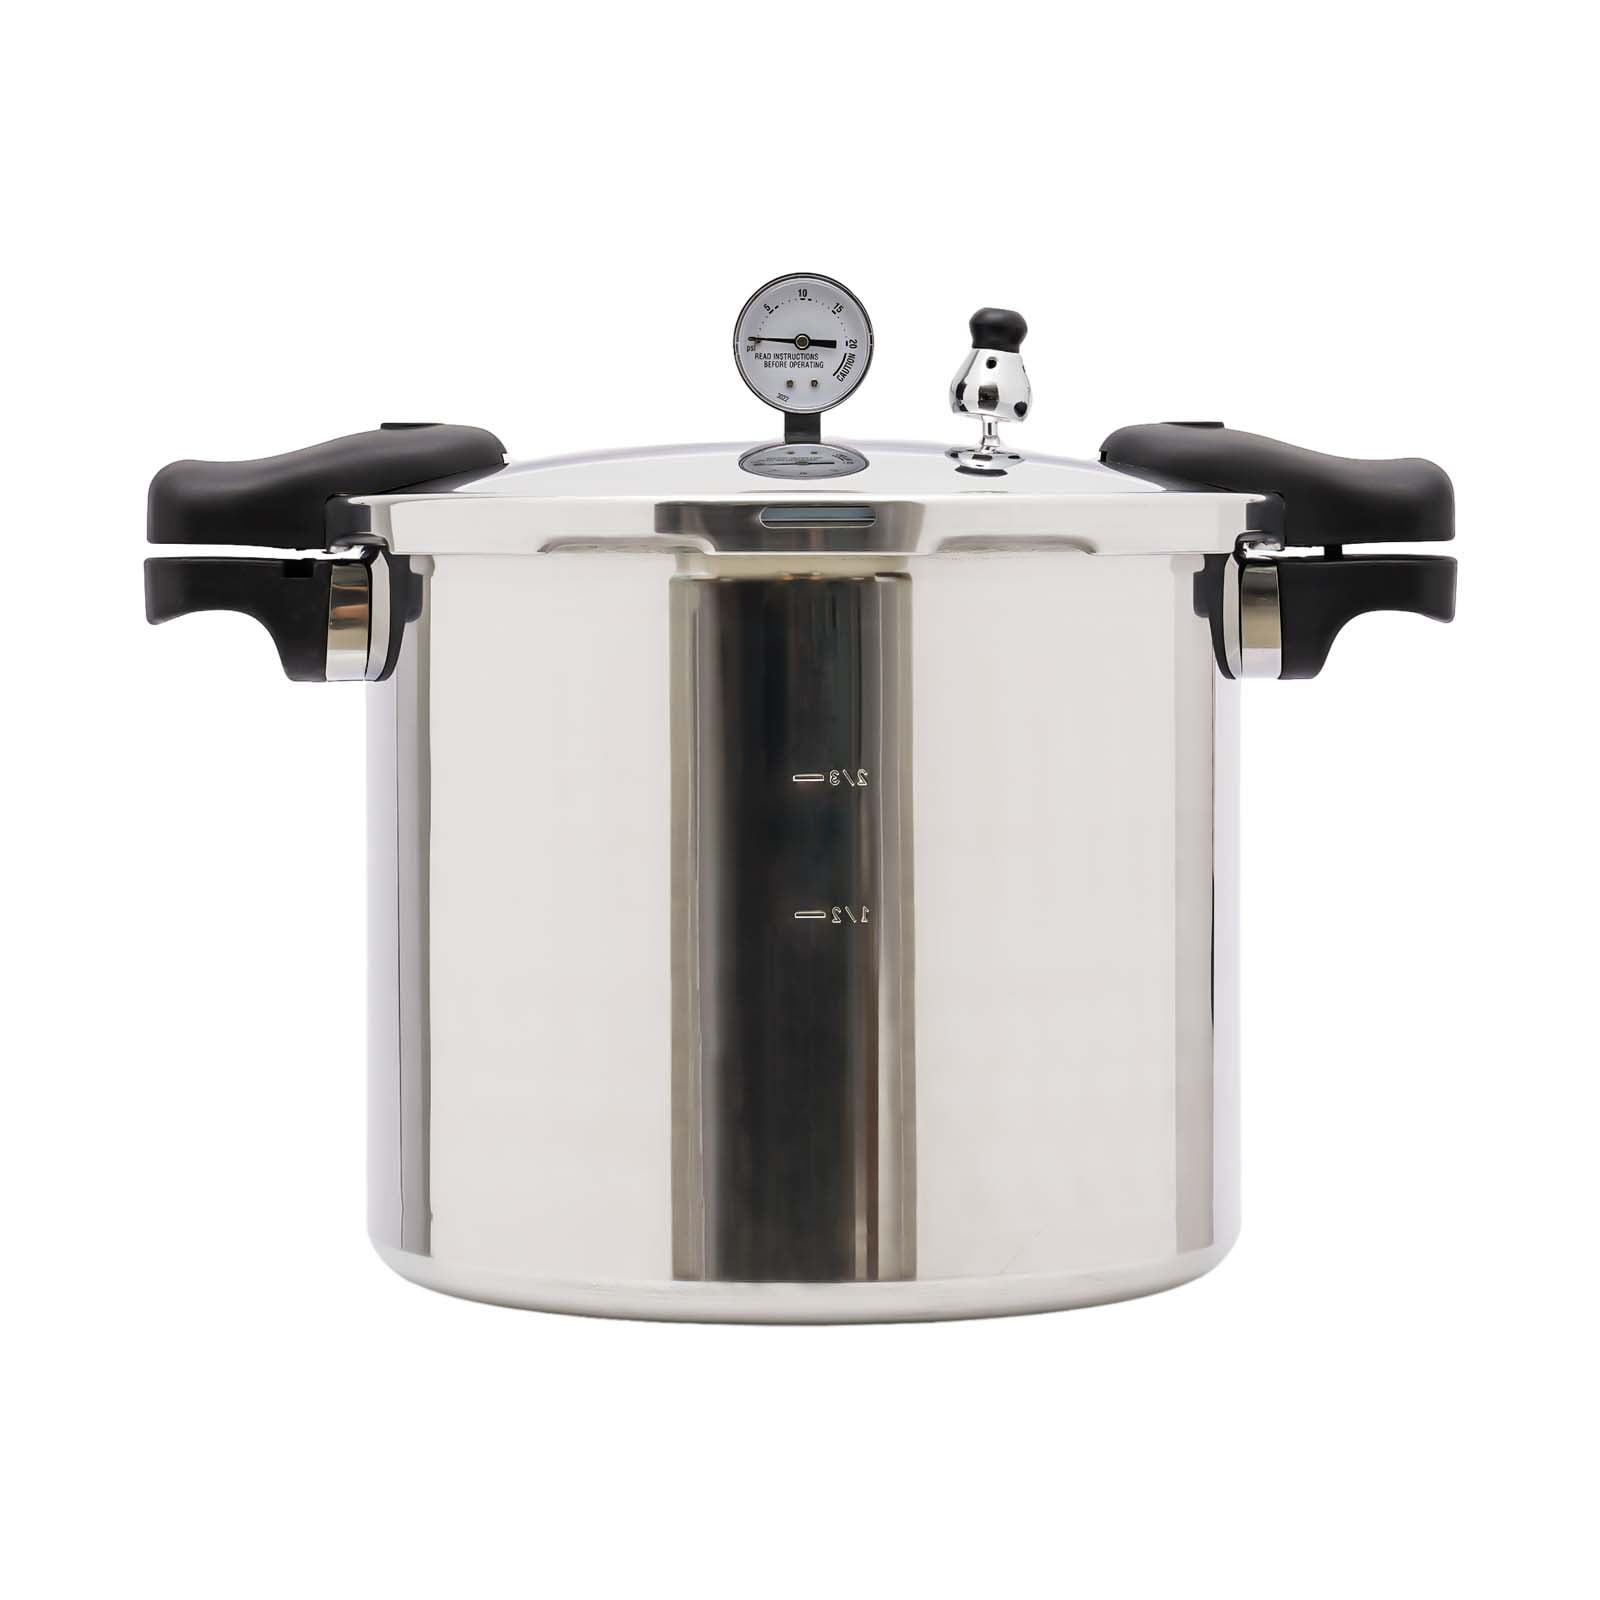 25quart pressure canner cooker and cooker with cooking rack canning  pressure cooker with gauge Explosion proof safety valve Extra-large size  great for